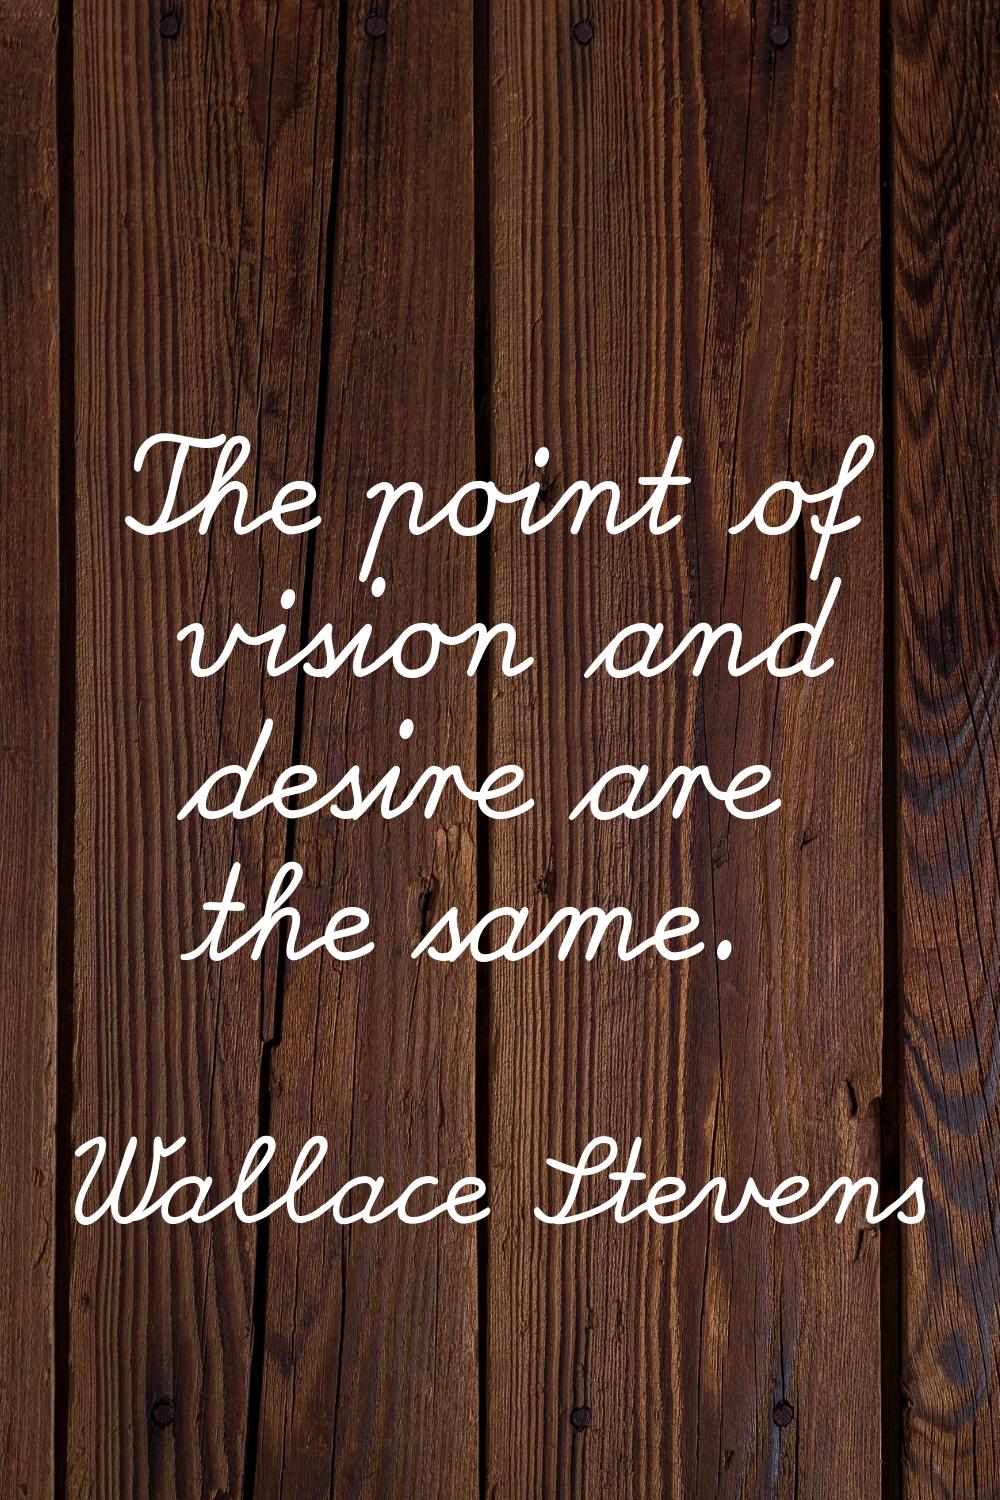 The point of vision and desire are the same.